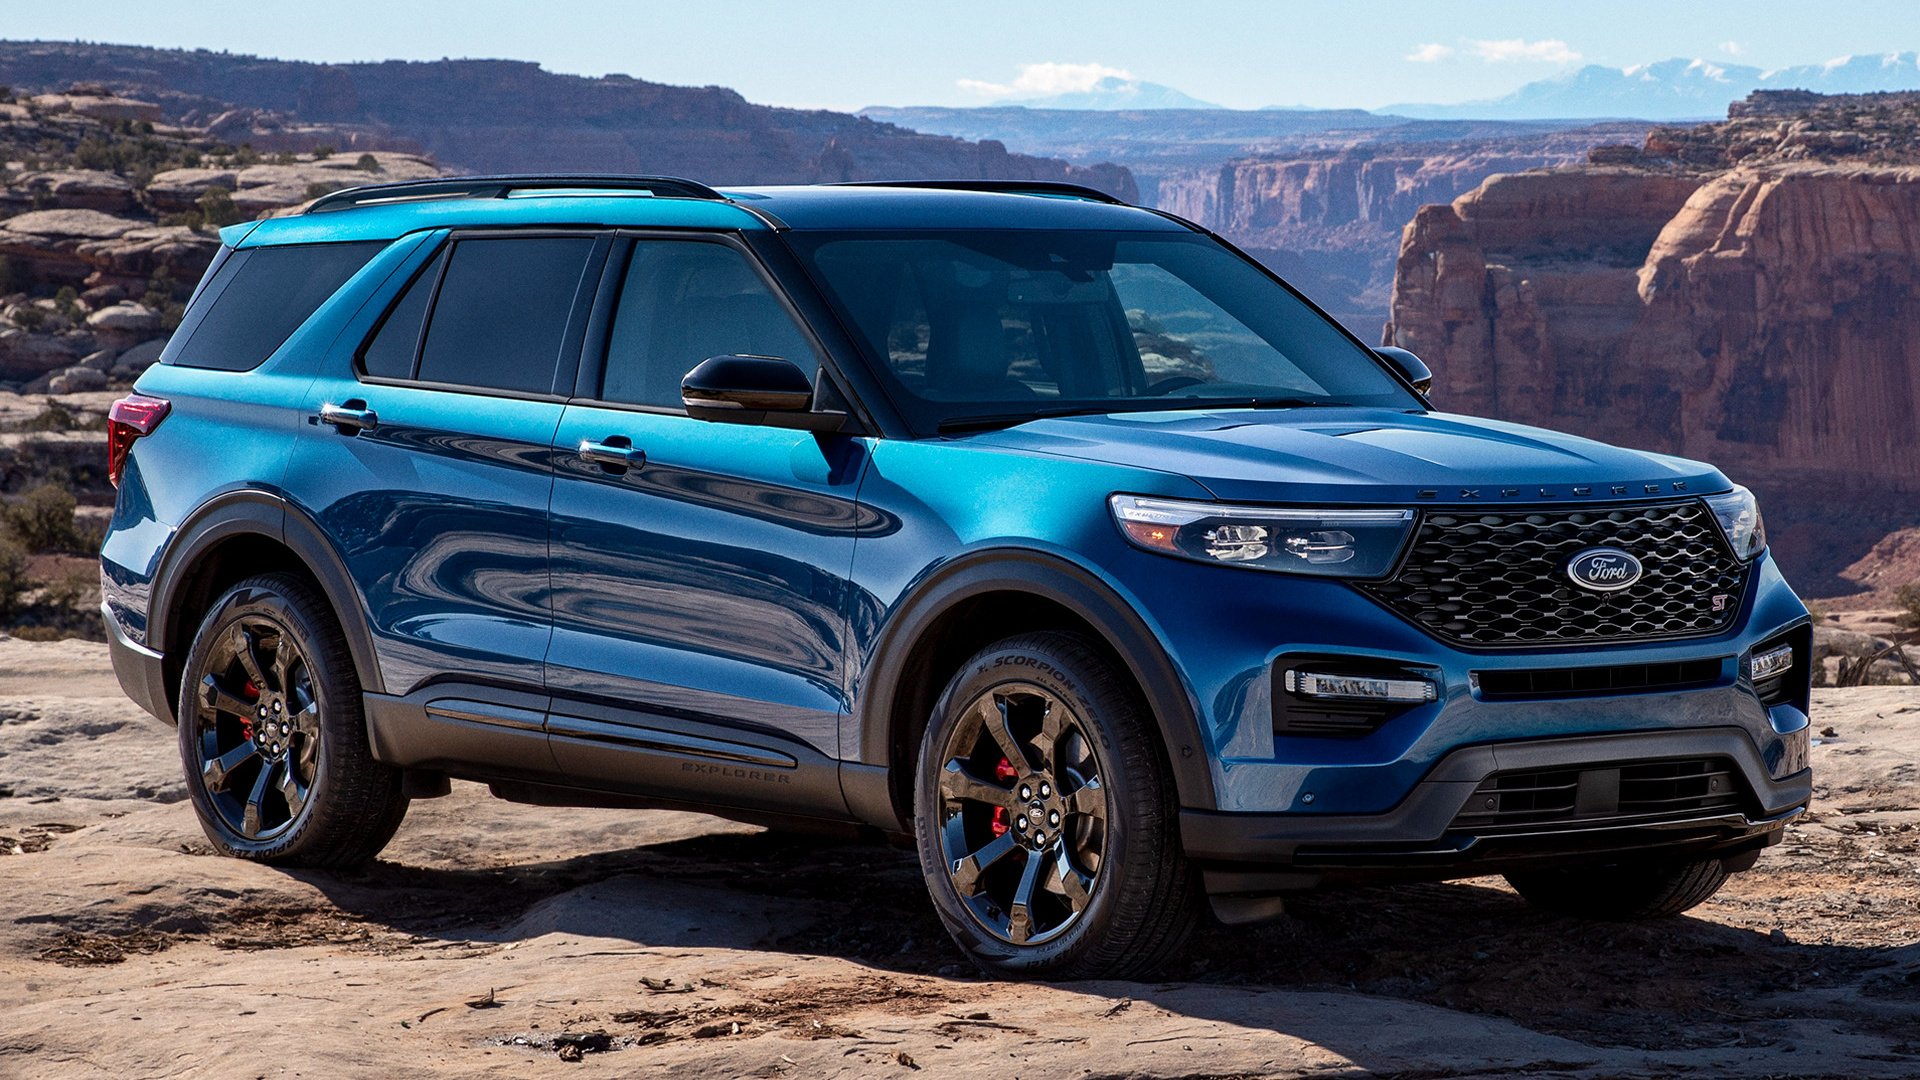 2020 Ford Explorer St Hd Wallpaper Background Image 1920x1080